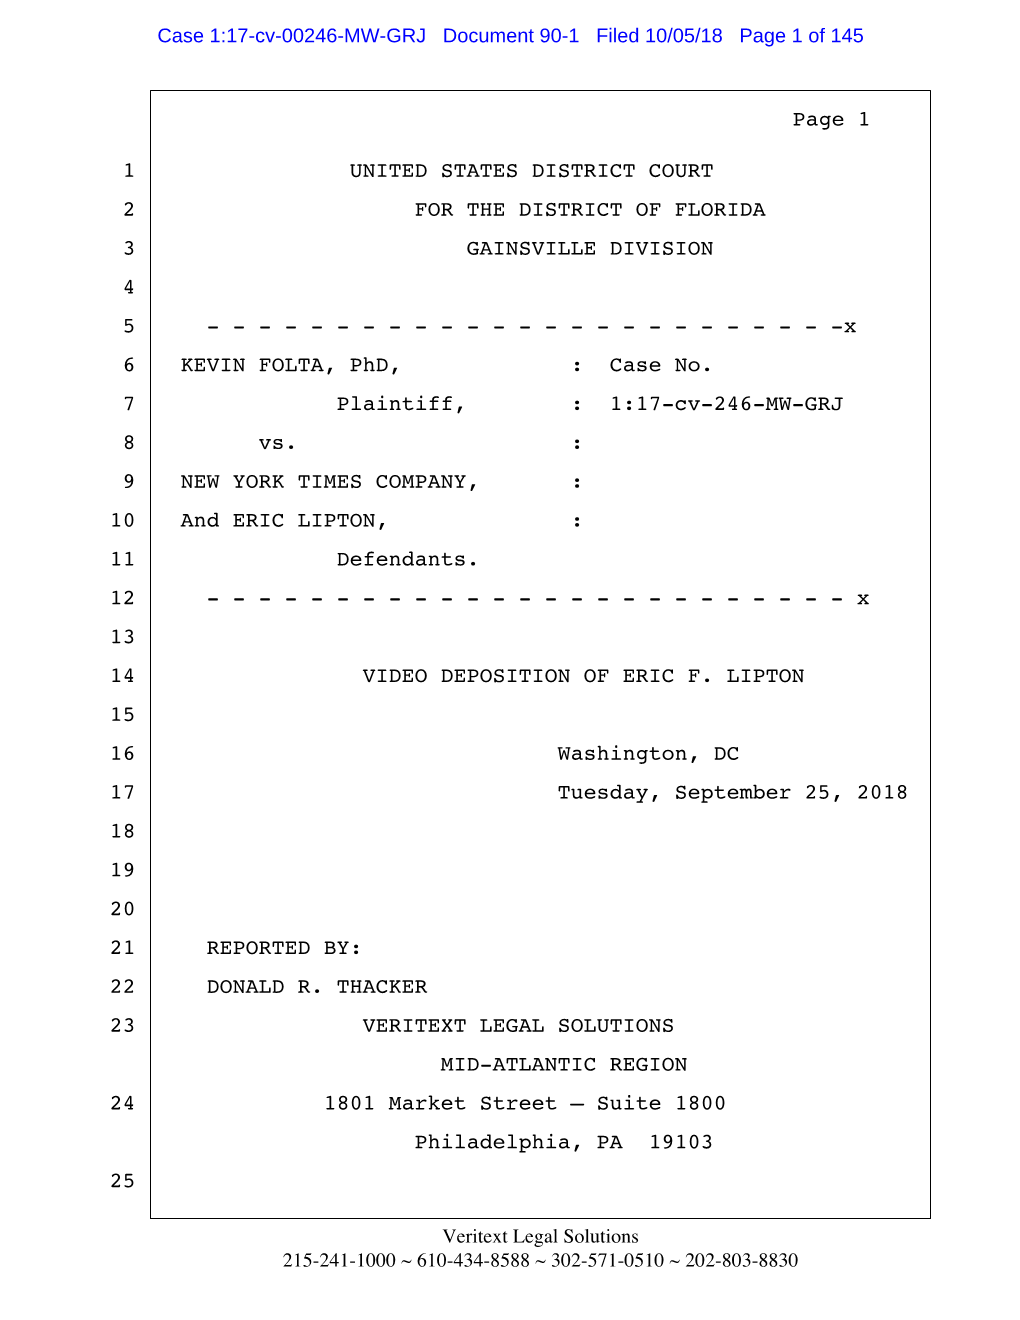 Eric Lipton Deposition in United States District Court for the District Of